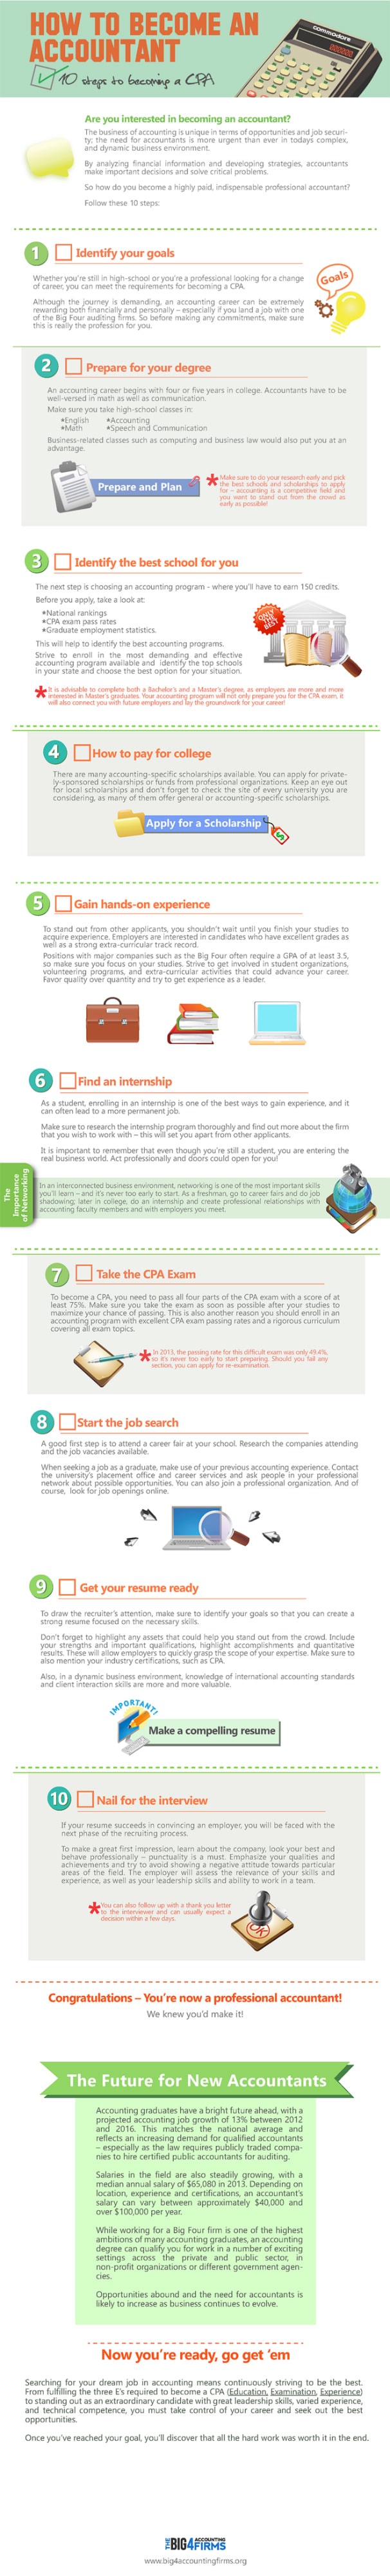 Become a CPA in 10 steps graphic_edit